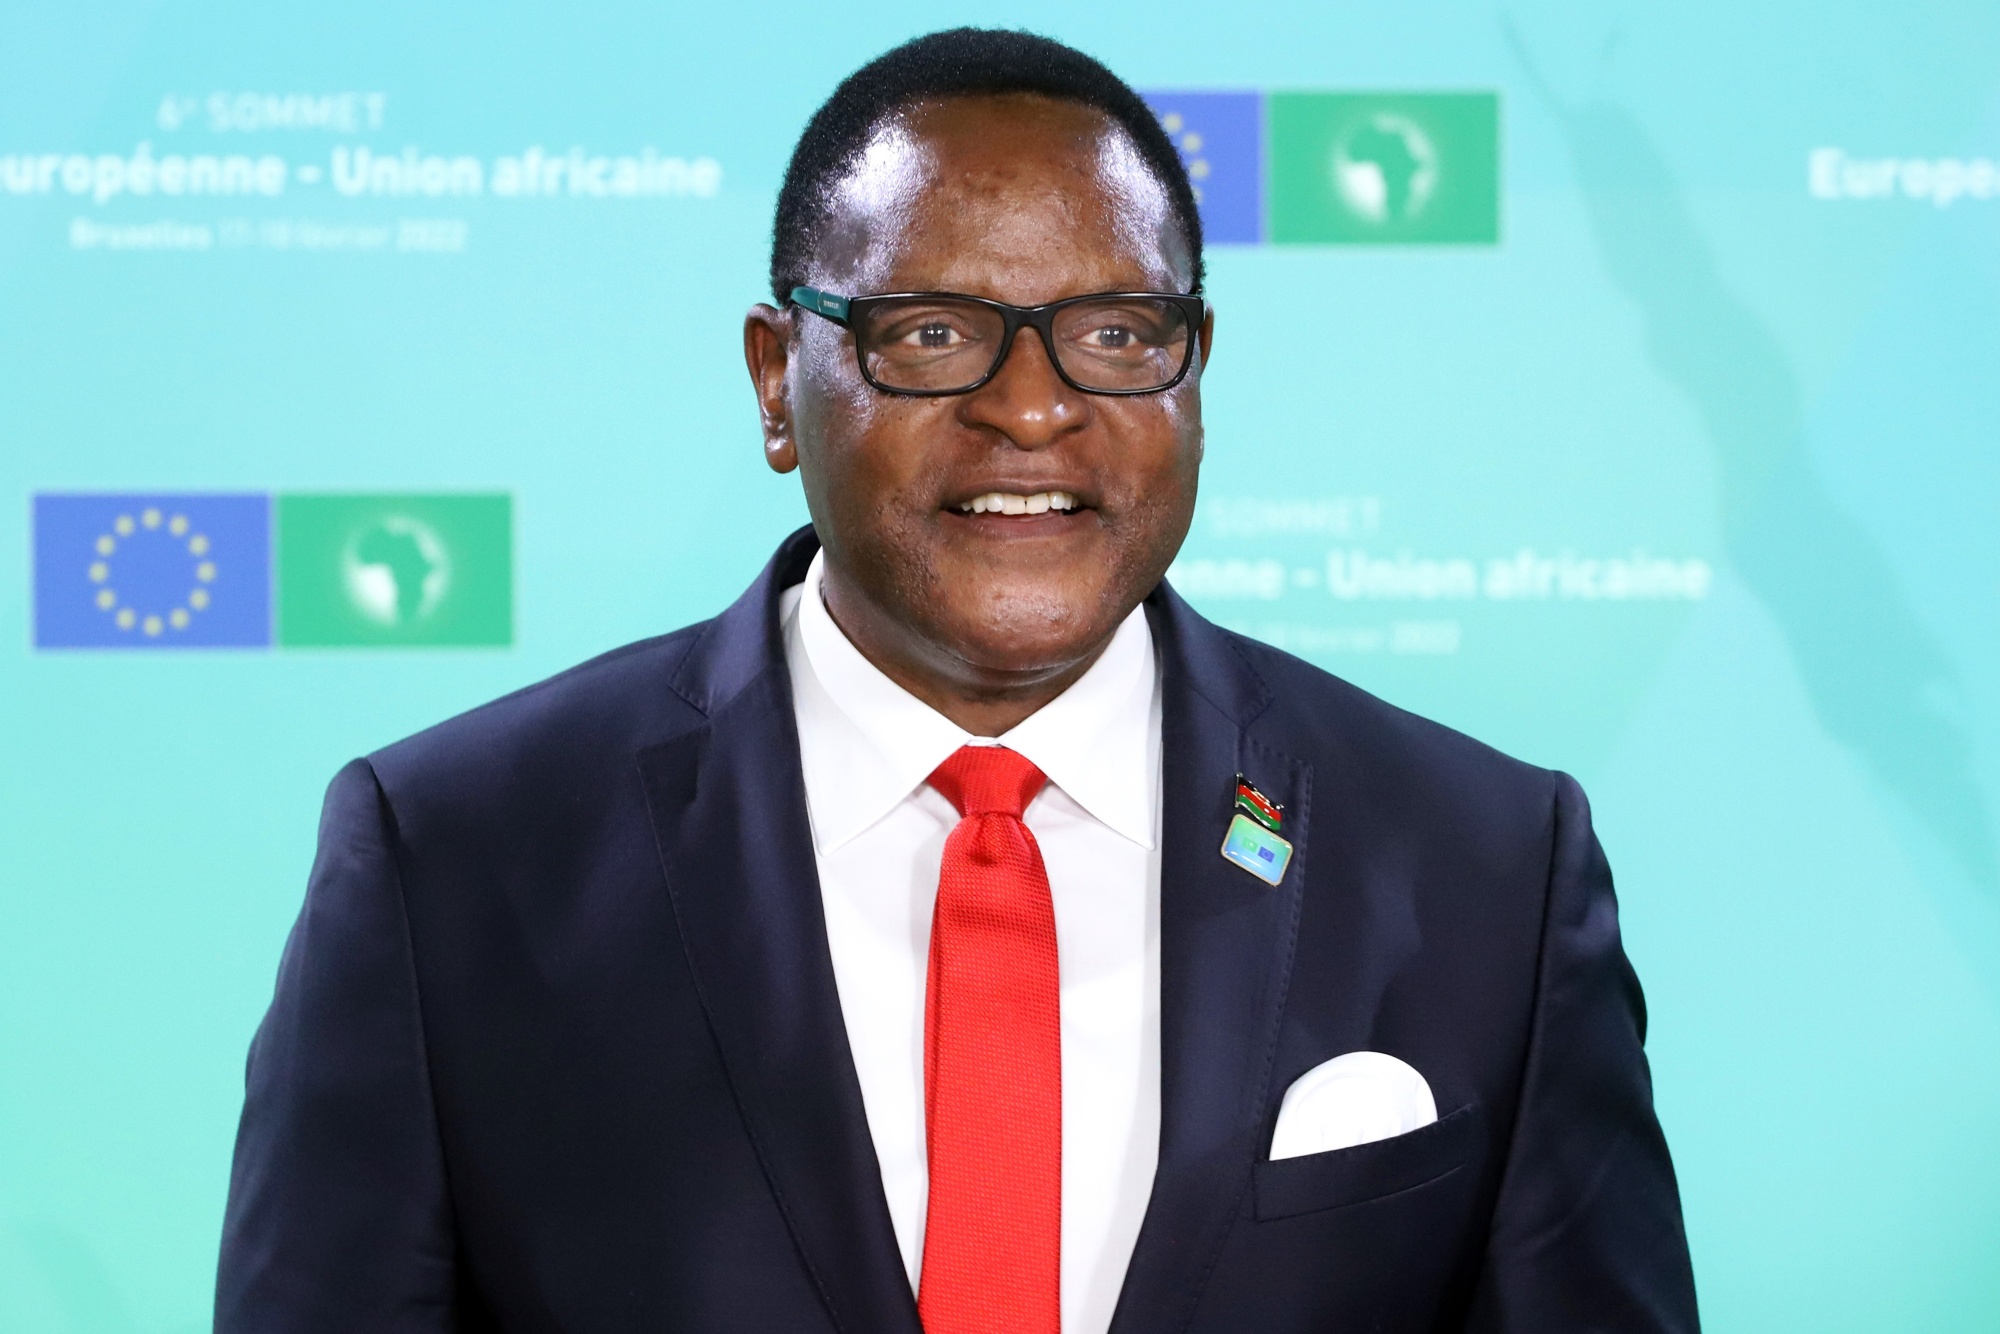 Man convicted for insulting Malawian President with TikTok video